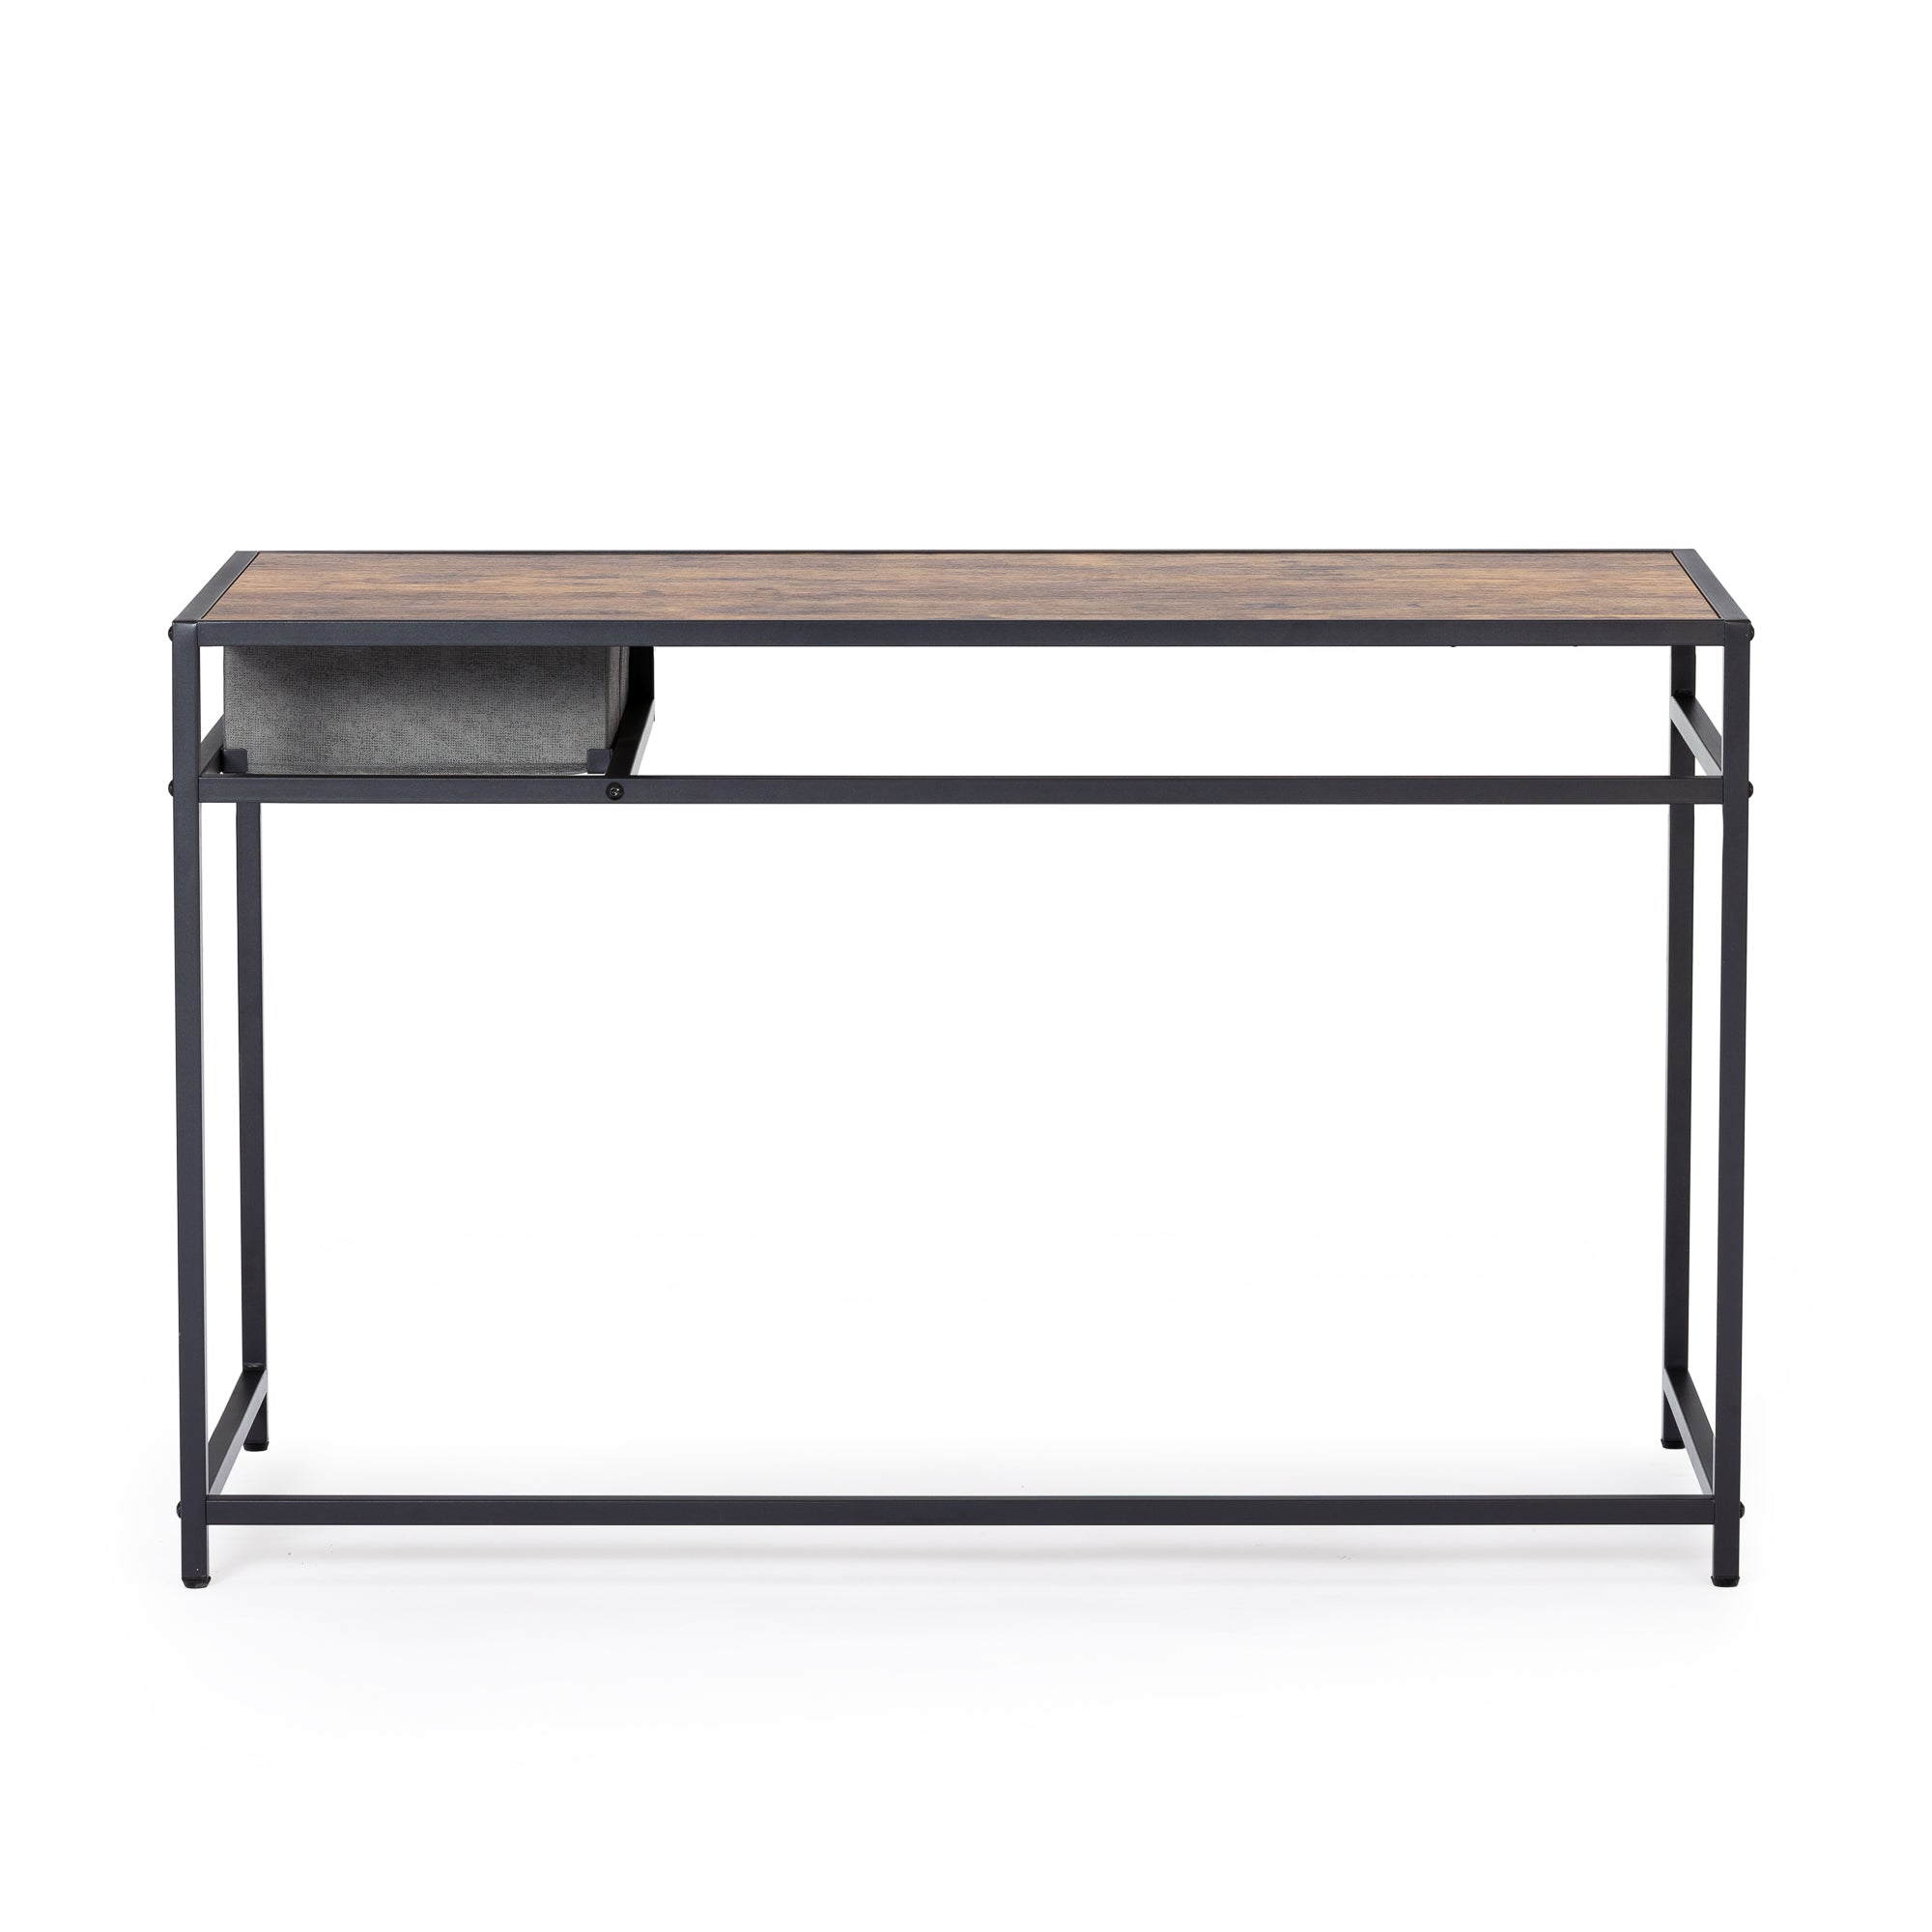 RaDEWAY Computer Desk with Drawer 46.5 inch Study Writing Table for Home Office, Modern Simple Style , Black Metal Frame, Rustic Brown